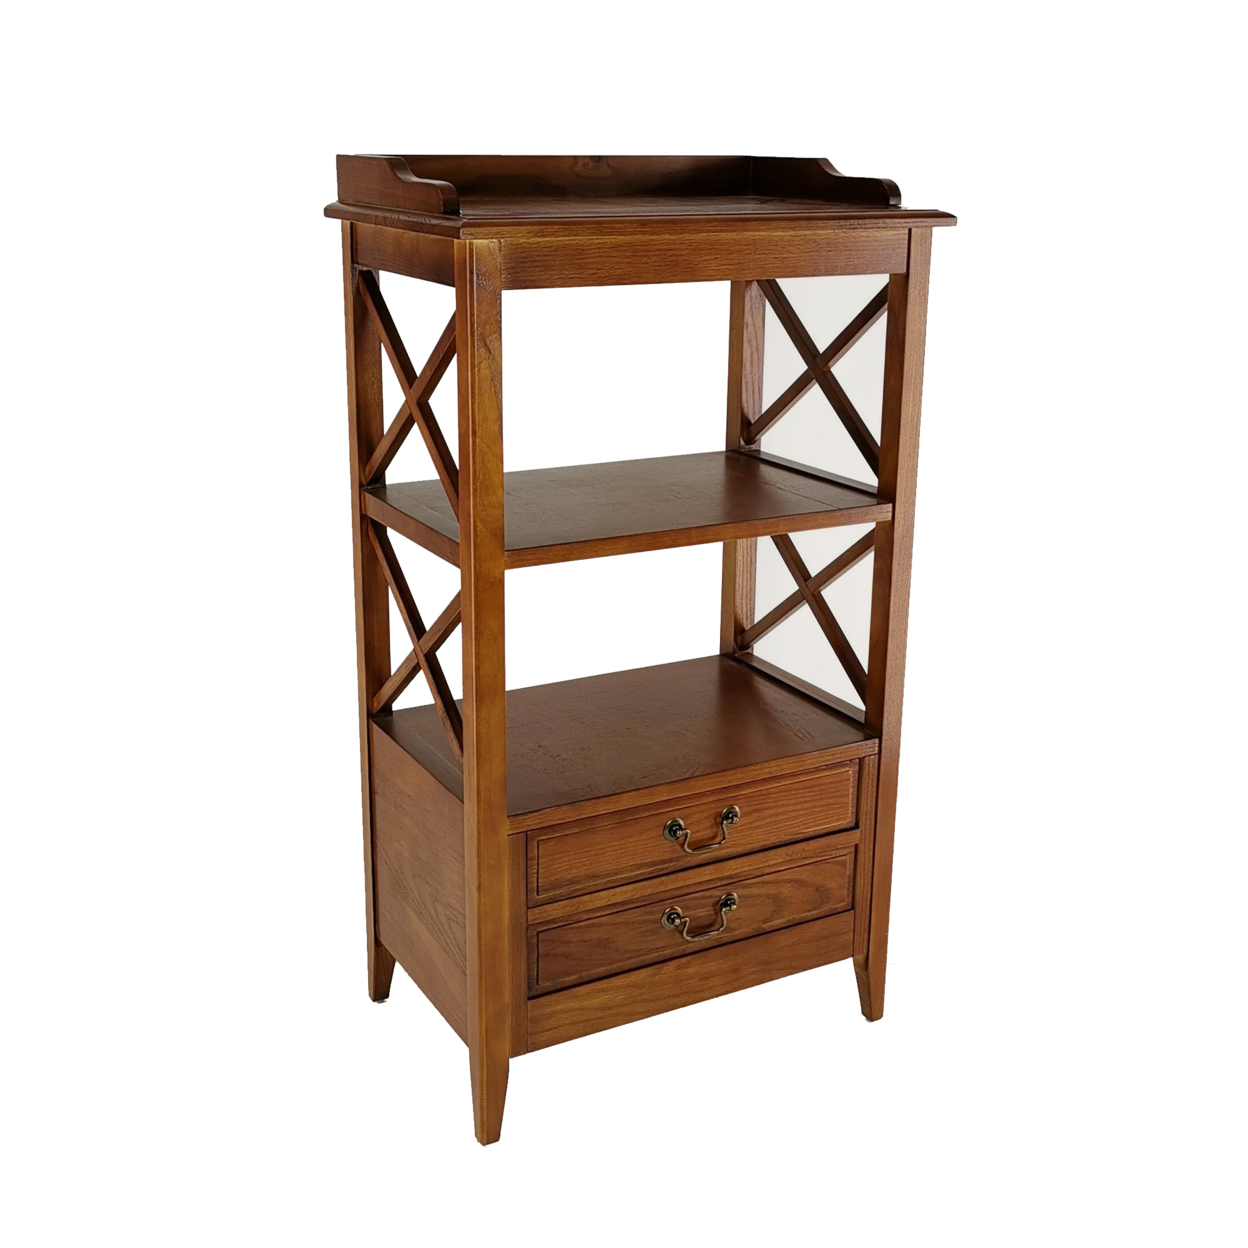 X Frame Wooden Rack With 2 Drawers And Open Shelf, Brown- Saltoro Sherpi